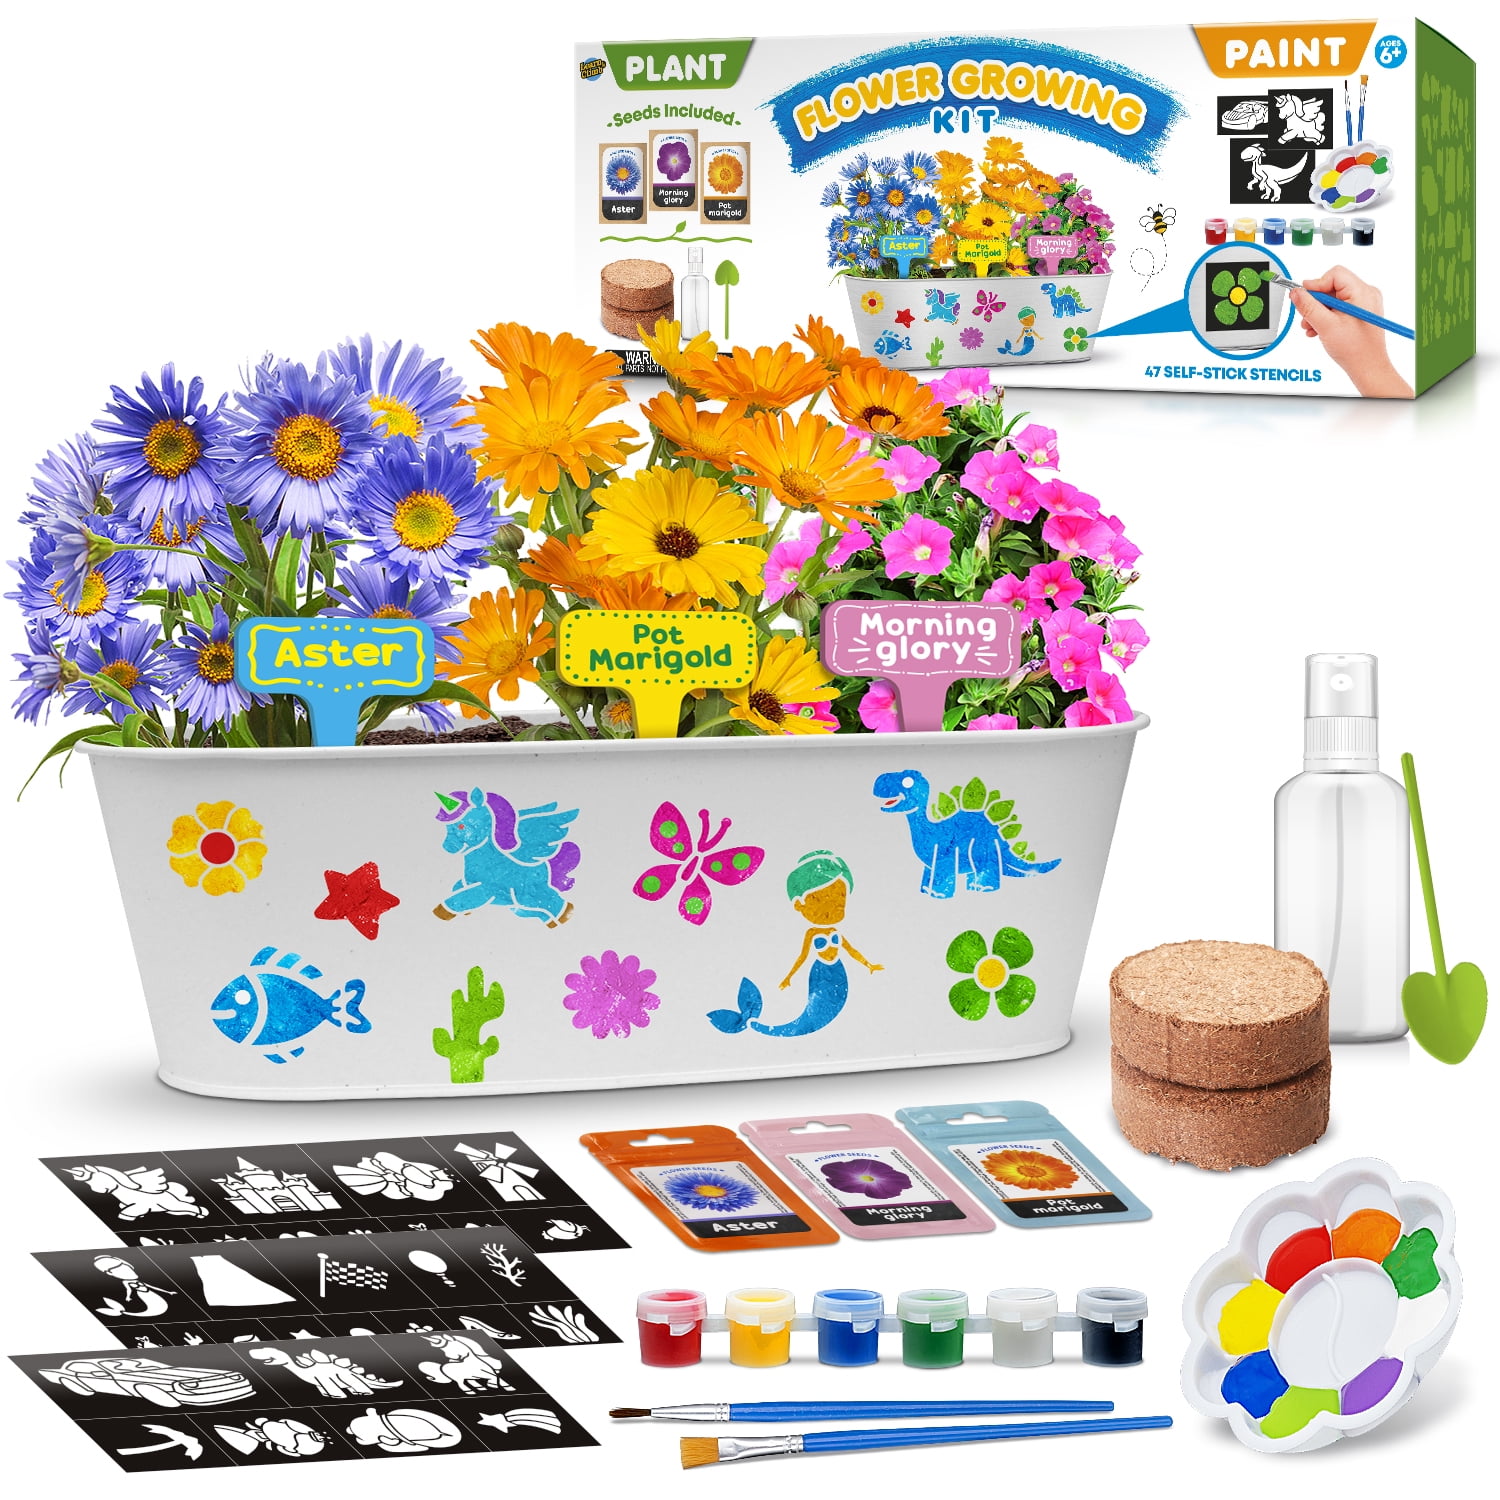 Innorock Paint Your Own Flower Plants Craft Kit for Kids 4-8